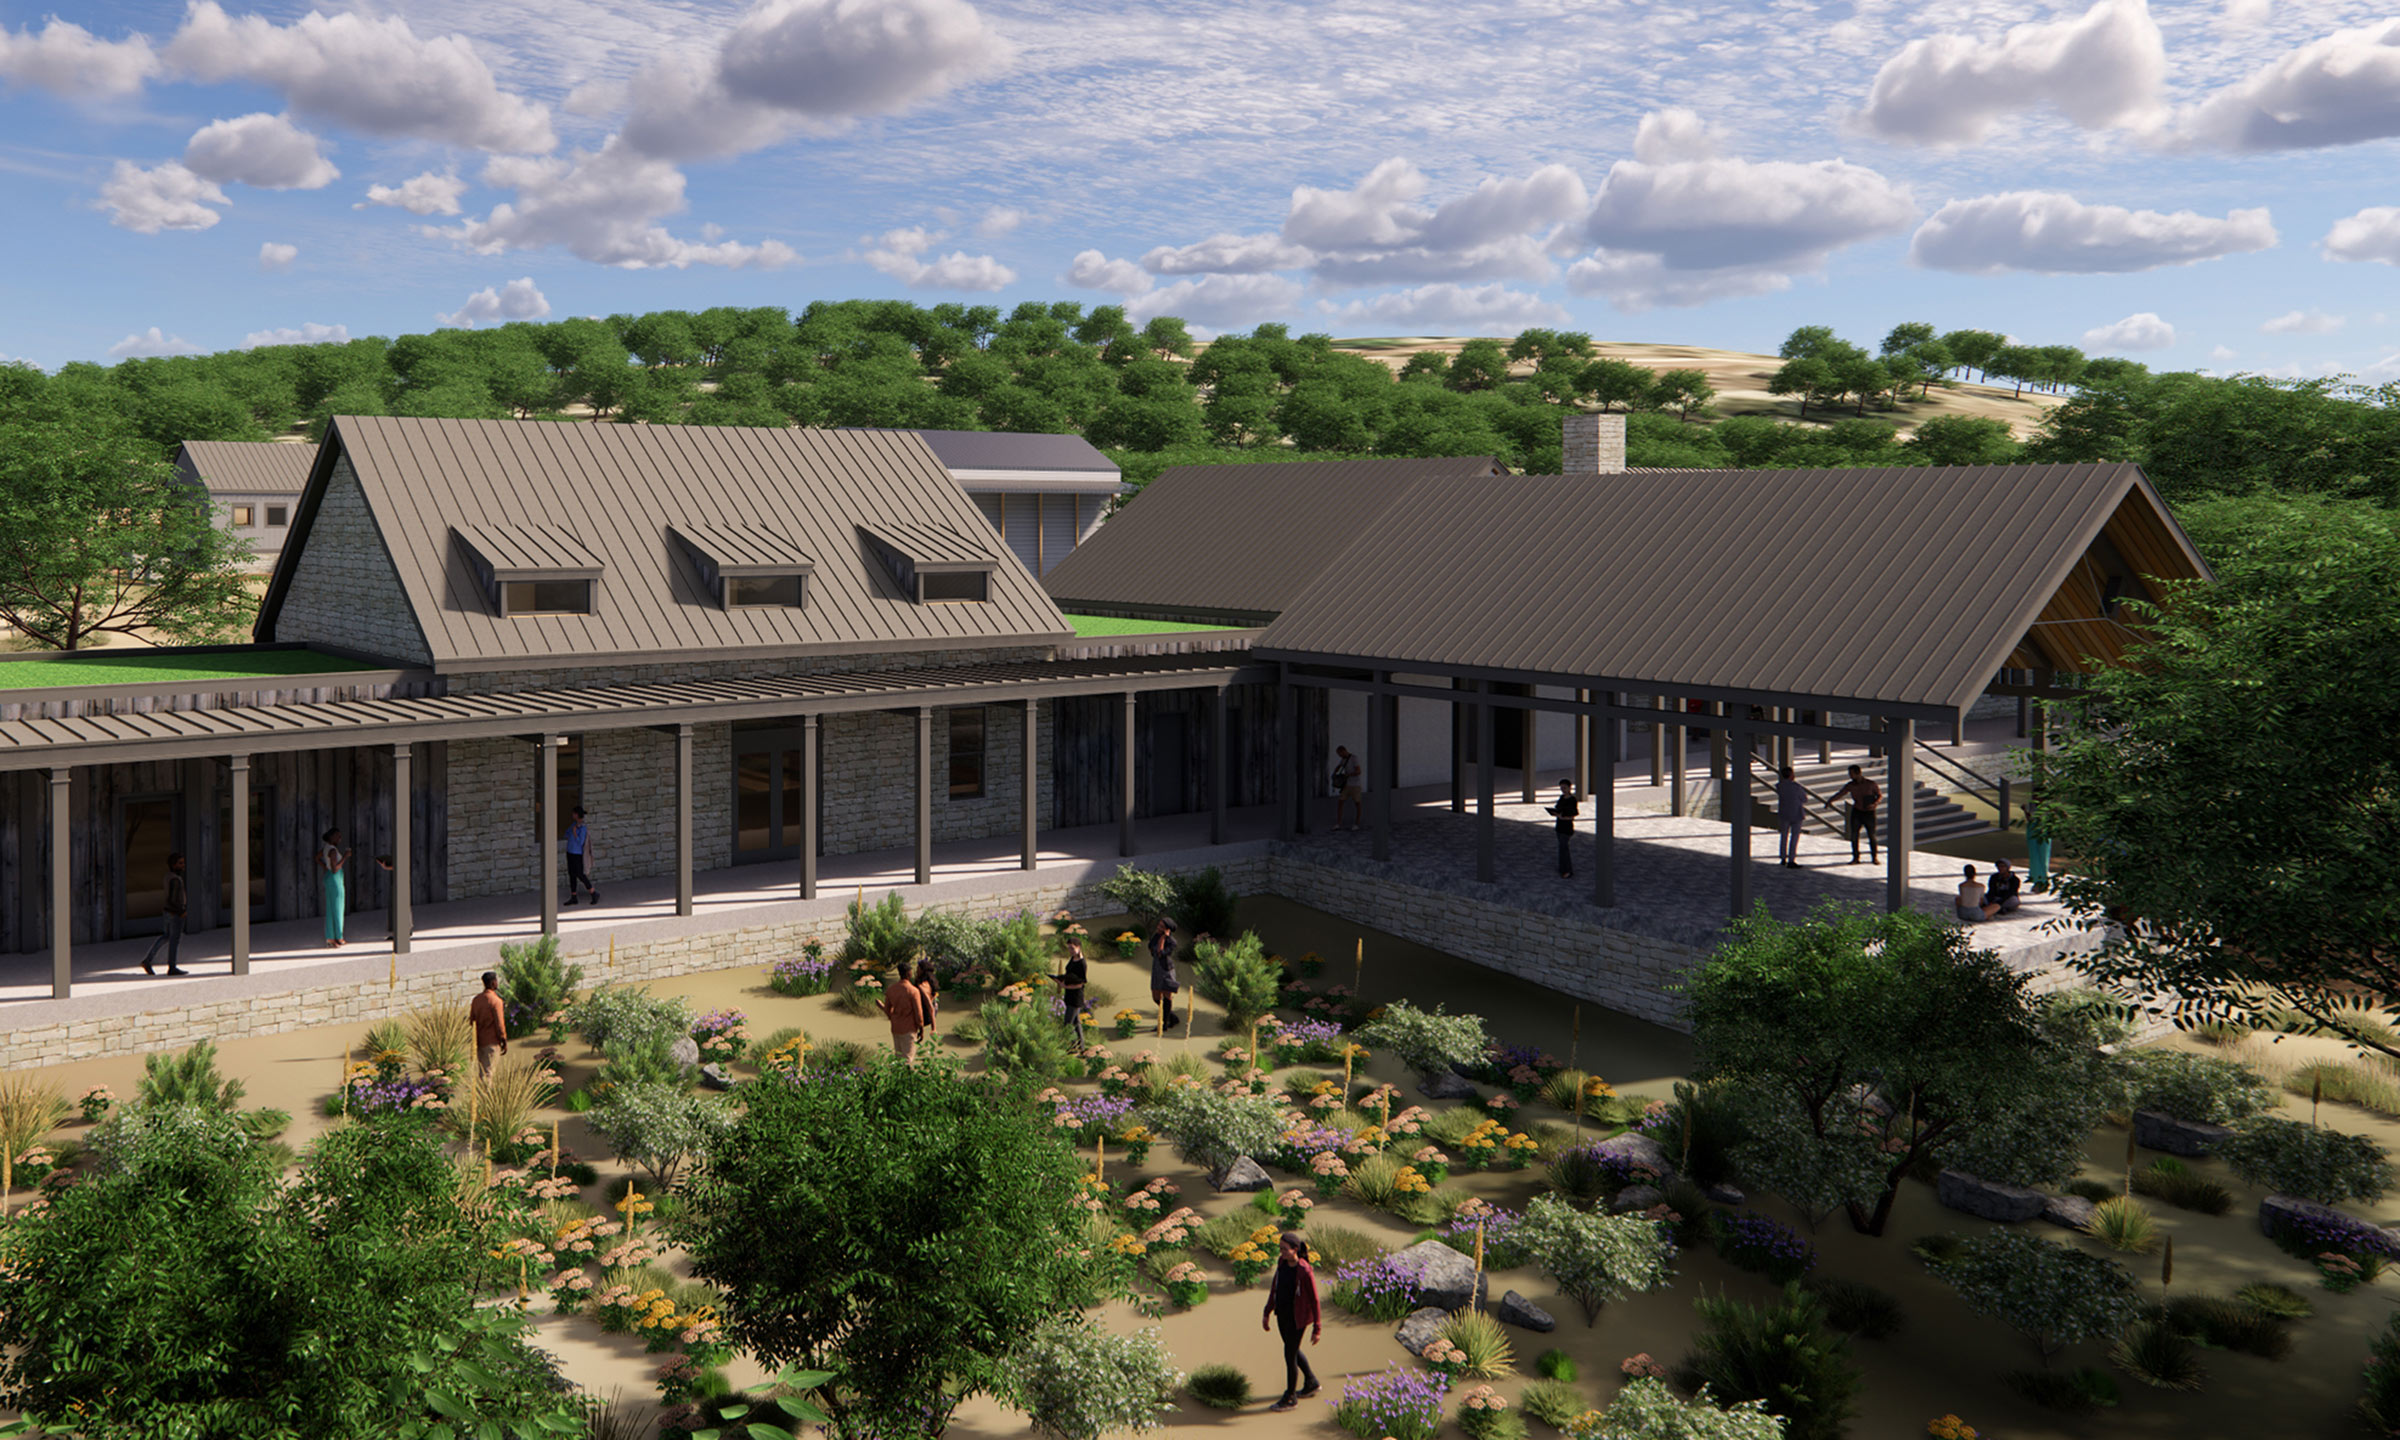 An artist's rendering of a building in the Texas hill Country wiht open air areas and a pollinator garden where people mill about